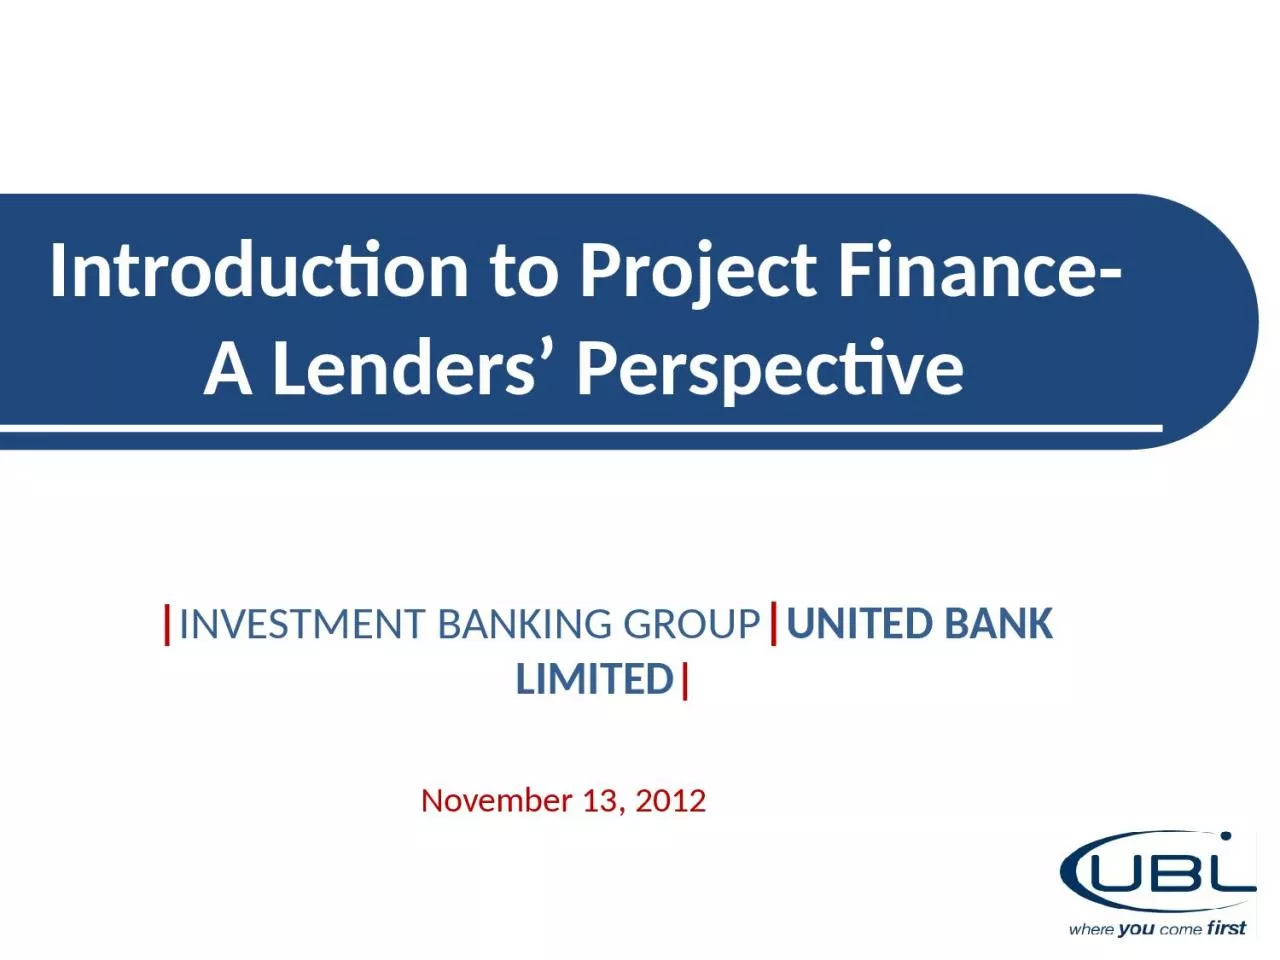 Introduction to Project Finance-A Lenders’ Perspective